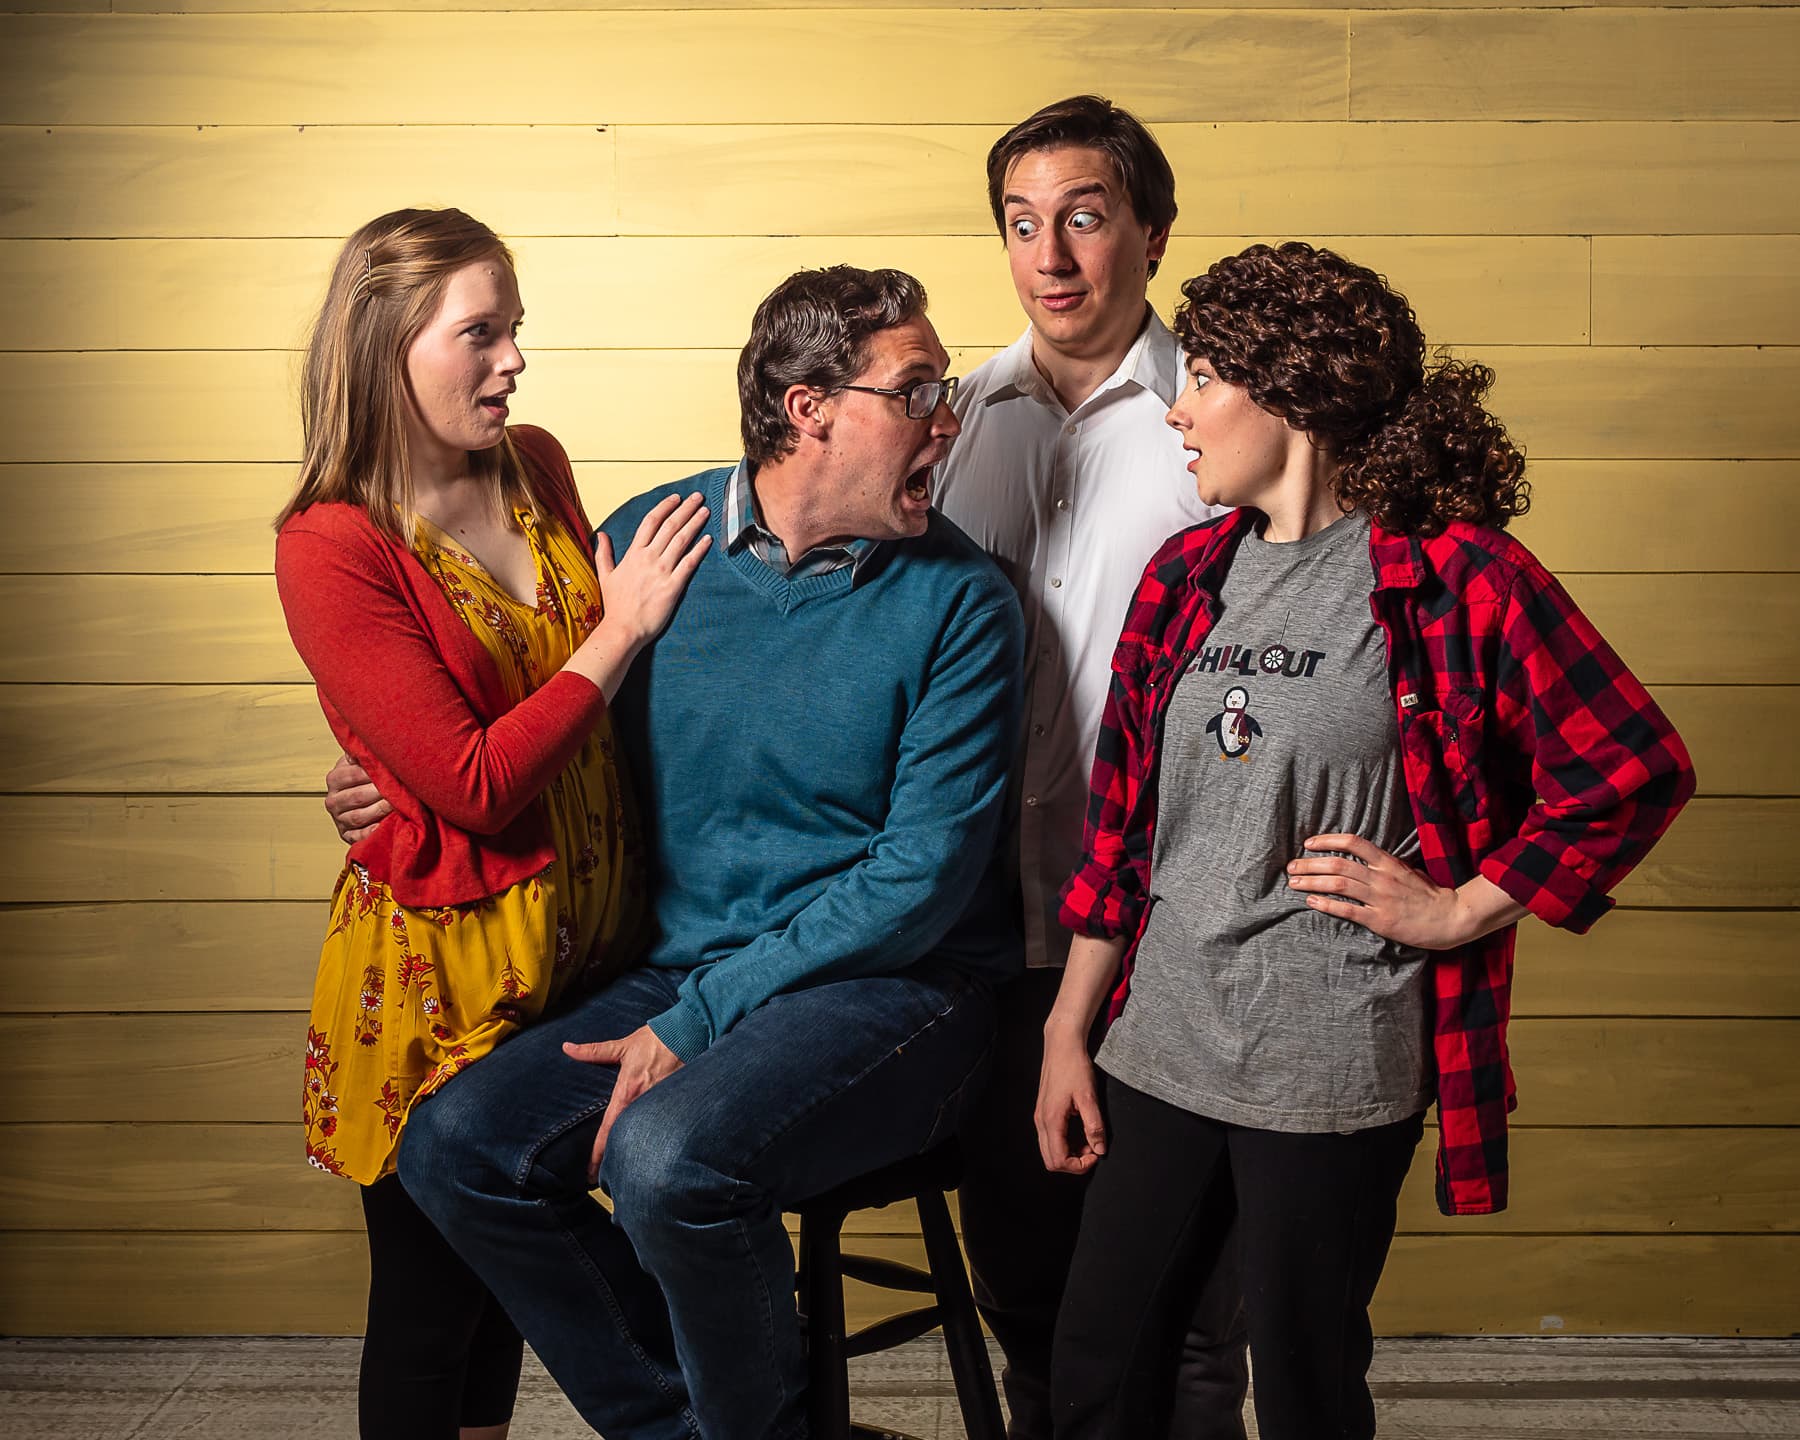 Full Cast (L to R): Molly Mayne as Melody, Jon Meeker as Liam, Michael Kranick as Jonah and Anna Steuerman as Daphna (Photo Credit: Bruce F. Press Photography)